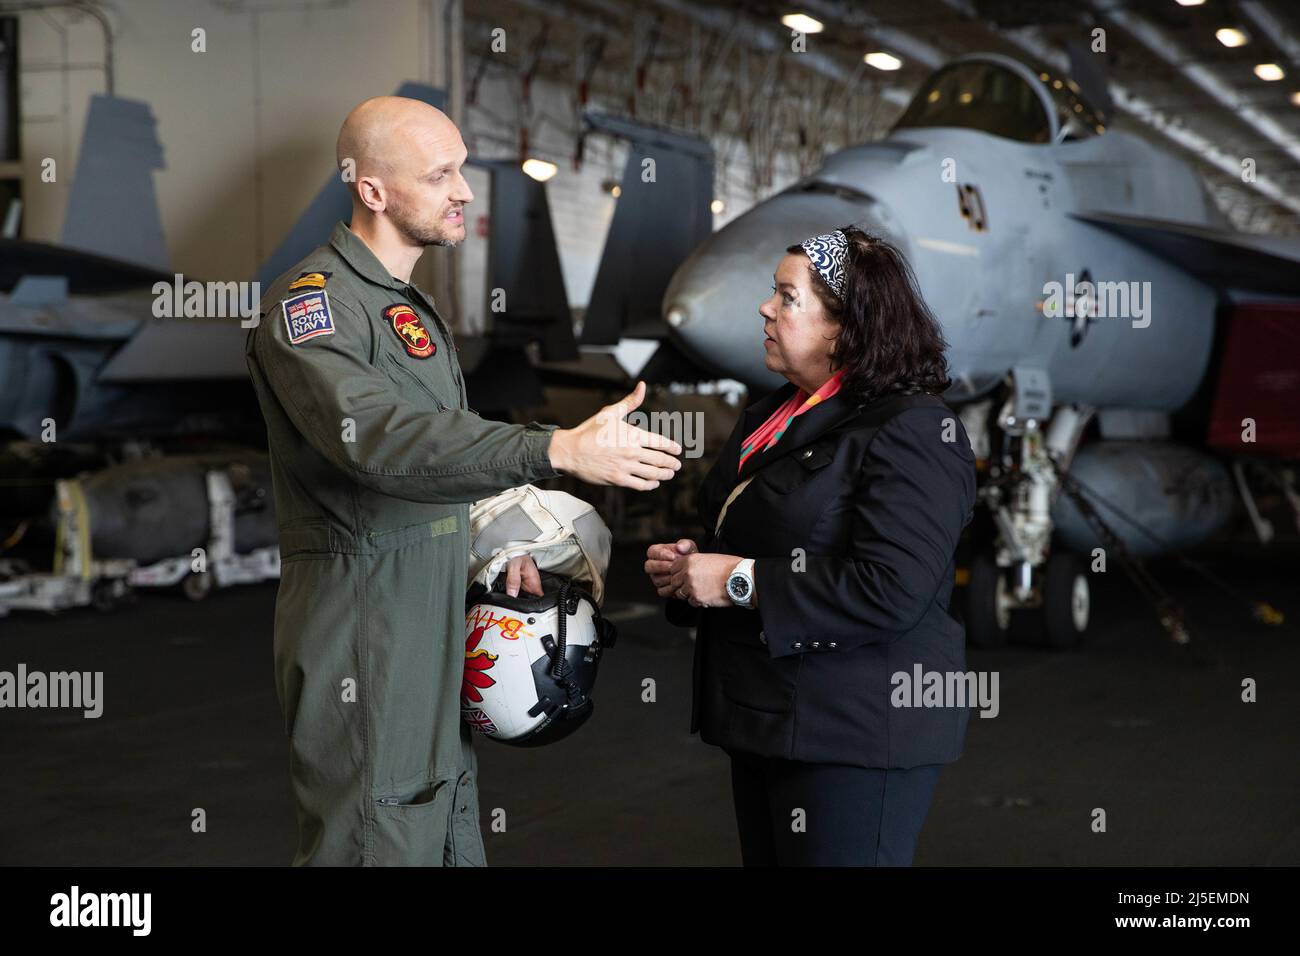 Dame Karen Pierce, Her Majesty's Ambassador to the United States of America, speaks with Lt. Thomas Sharp, a Royal Navy exchange pilot, attached to the 'Golden Warriors' of Strike Fighter Squadron (VFA) 87, serving on USS Gerald R. Ford (CVN 78), April 21, 2022. Her Majesty's Ambassador and staff visited Ford to observe flight operations and discuss Ford-class unique systems and equipment. Ford is underway in the Atlantic Ocean conducting carrier qualifications and strike group integration as part of the ship’s basic training phase. (U.S. Navy photo by Mass Communication Specialist 2nd Class A Stock Photo